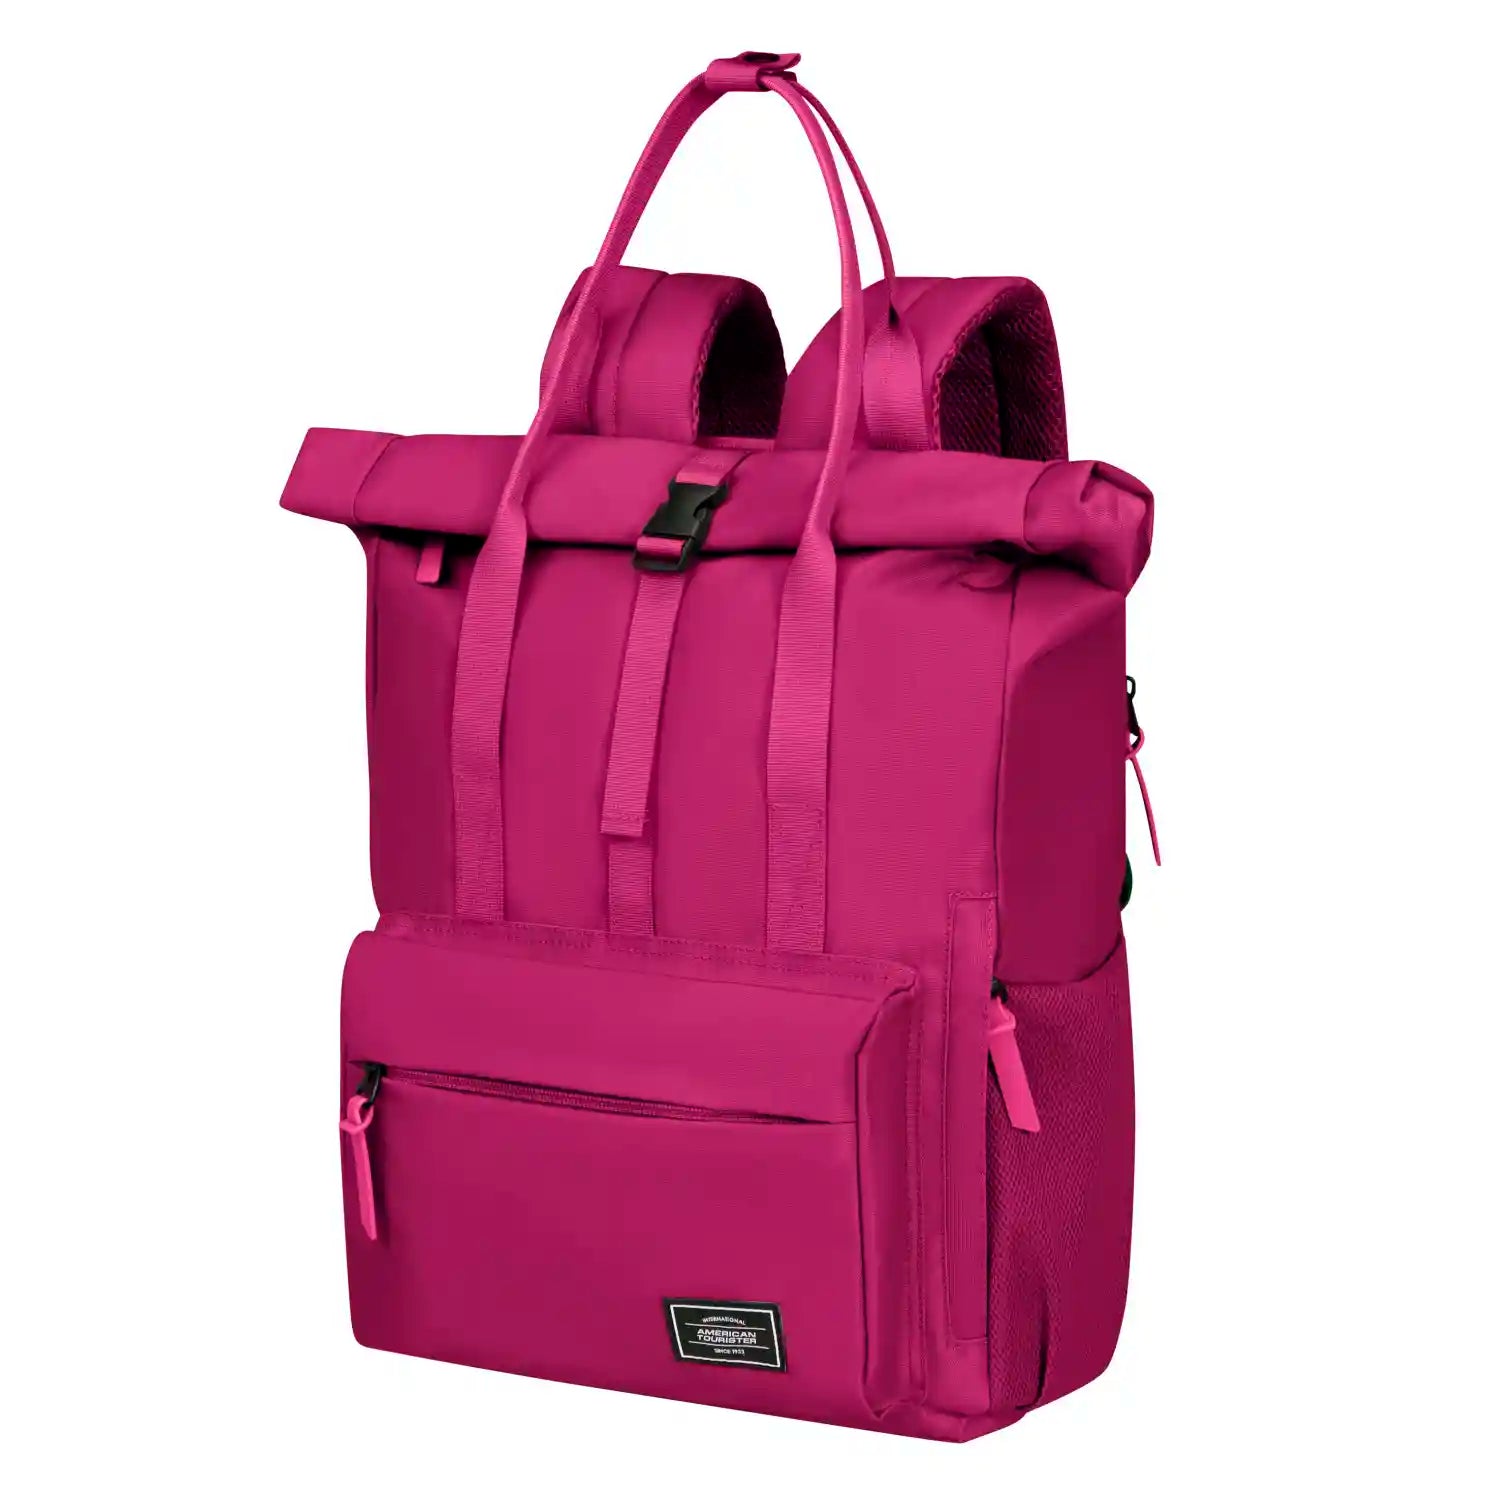 American Tourister Urban Groove Tote Backpack 43 cm - Deep Orchid